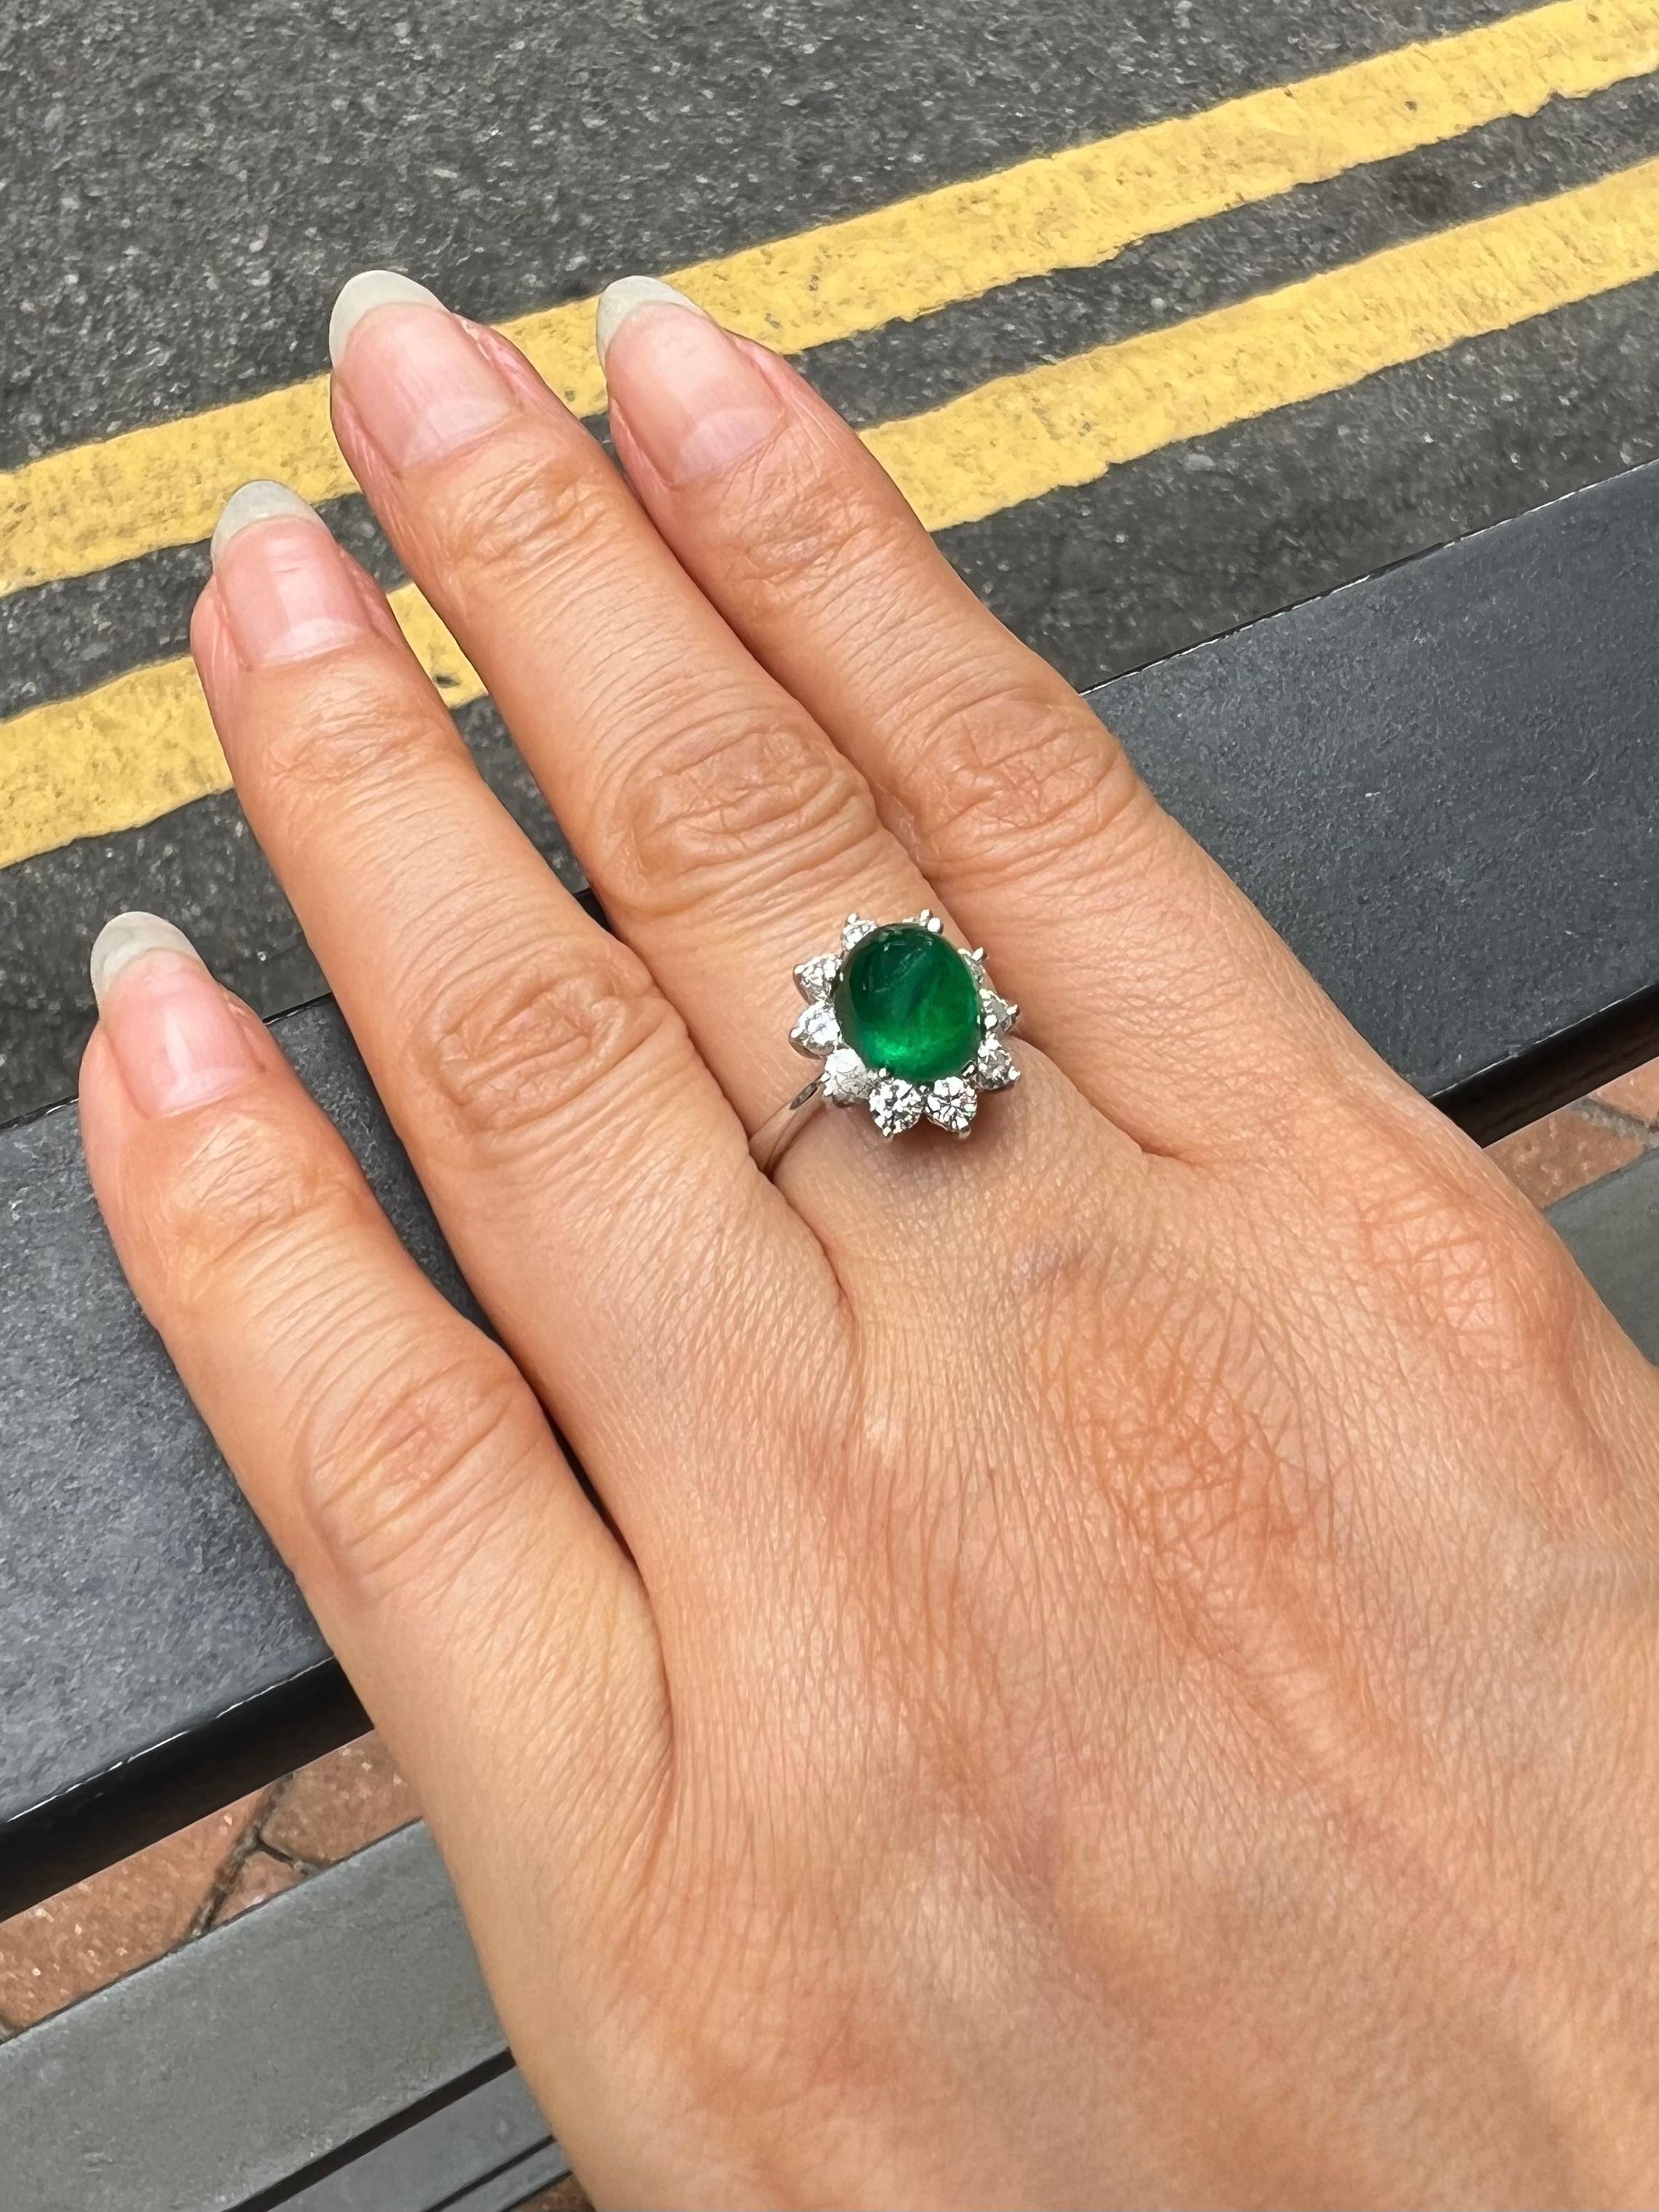 Women's GRS Certified 2.72 Cts Columbian Minor Muzo Emerald Ring. Special Appendix  For Sale